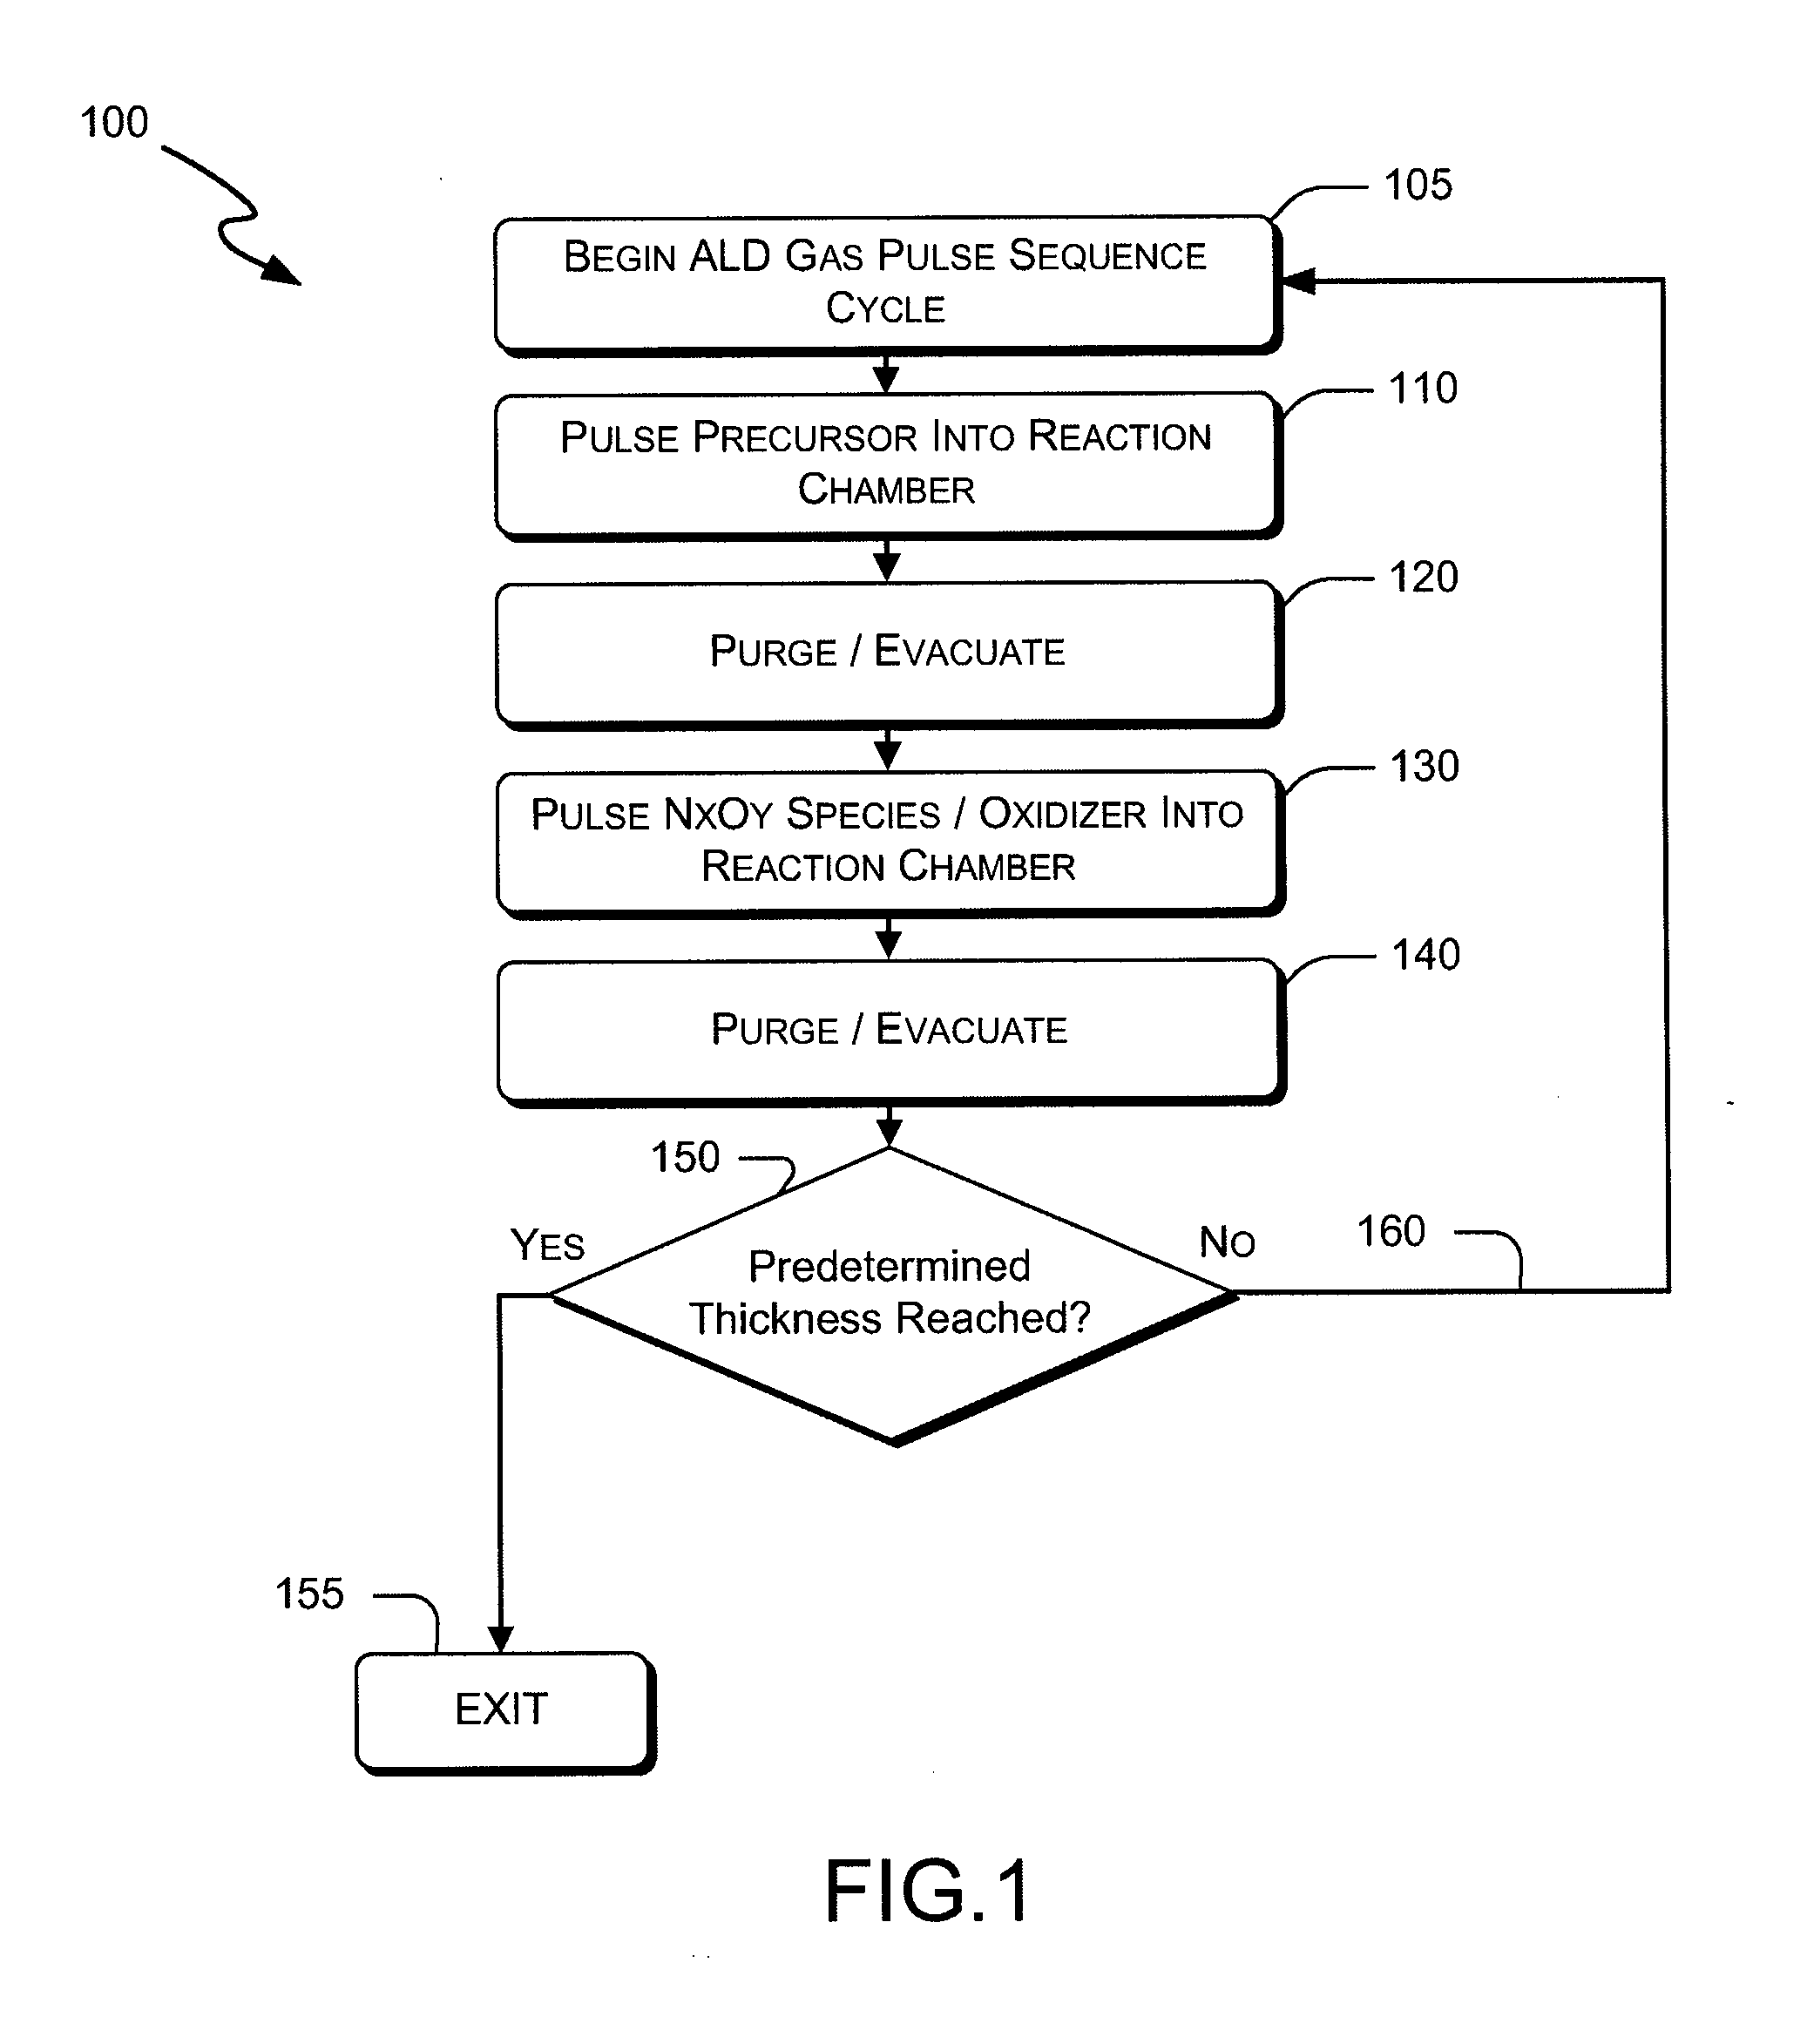 Systems and methods for thin-film deposition of metal oxides using excited nitrogen-oxygen species